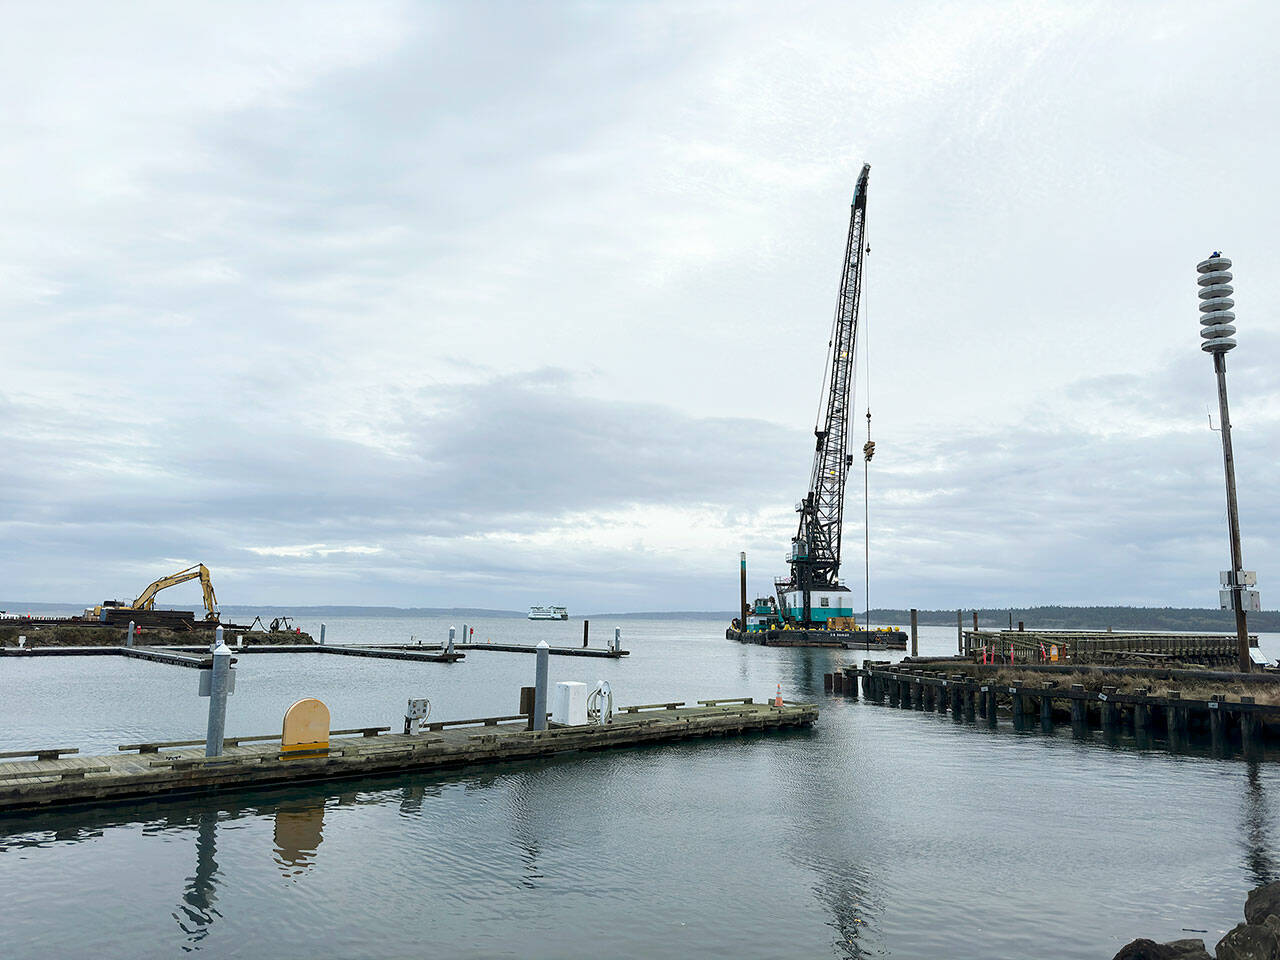 The north end of the Point Hudson Marina is gone, leaving a gaping opening to the marina until it is replaced with a newer breakwater, expected to be in March. The south side will be replaced after the Wooden Boat Festival next September. The M/V Salish is in the background and completing a Monday morning run from Coupeville to Port Townsend. (Steve Mullensky/for Peninsula Daily News)